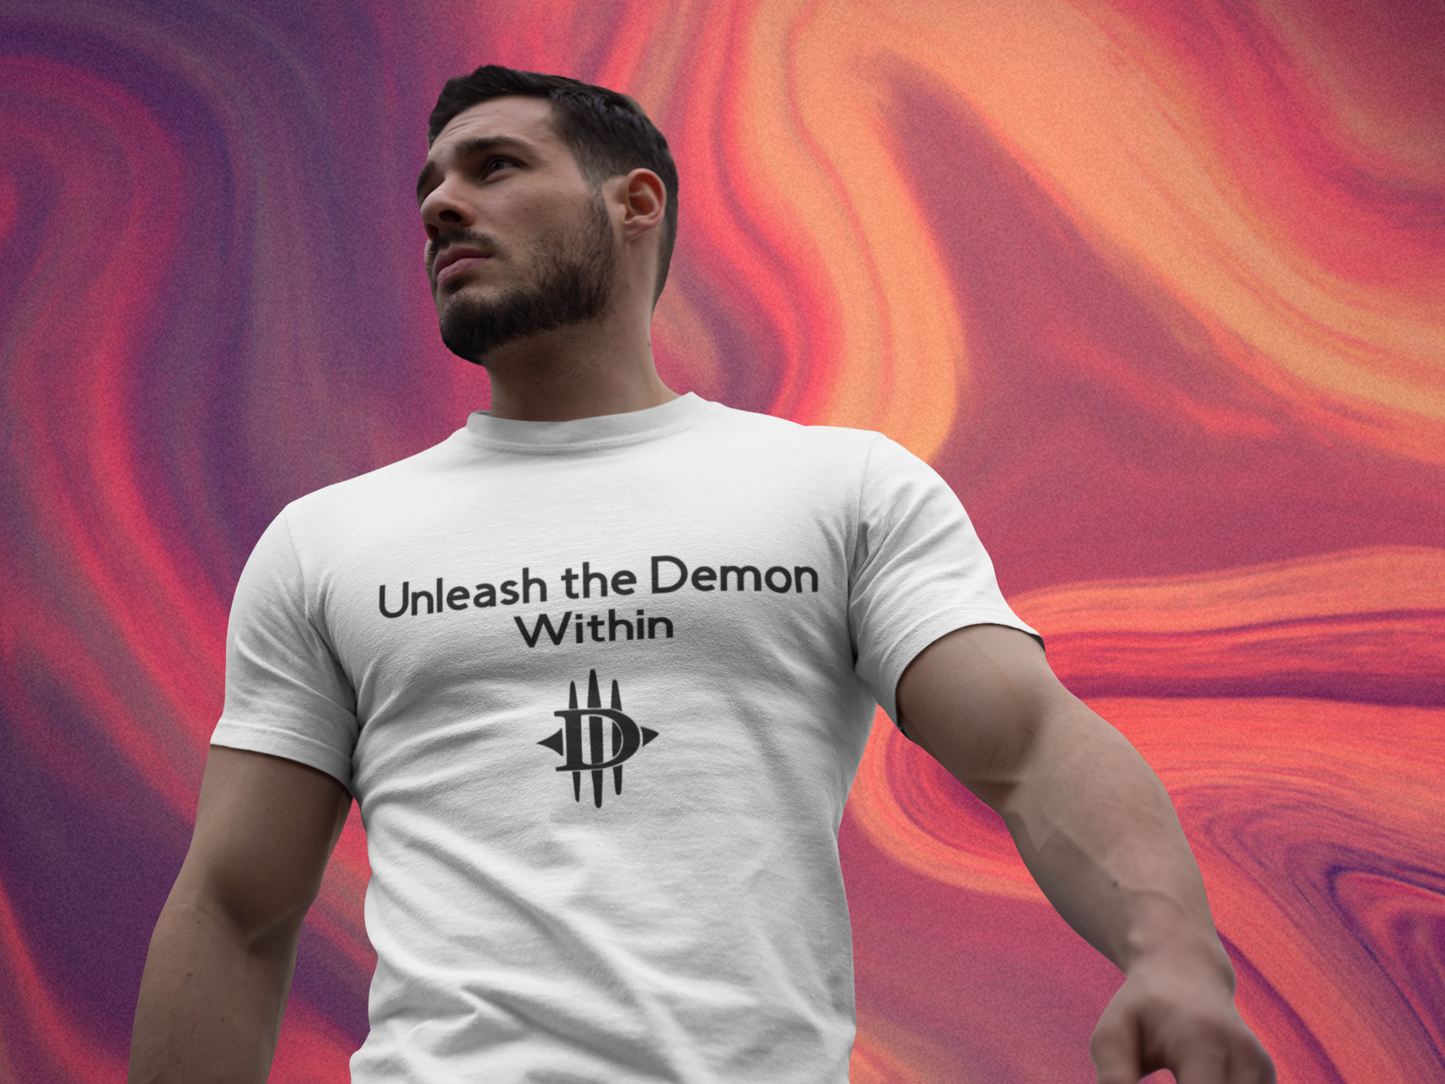 handsome muscular guy wearing a white t-shirt that says Unleash The Demon Within